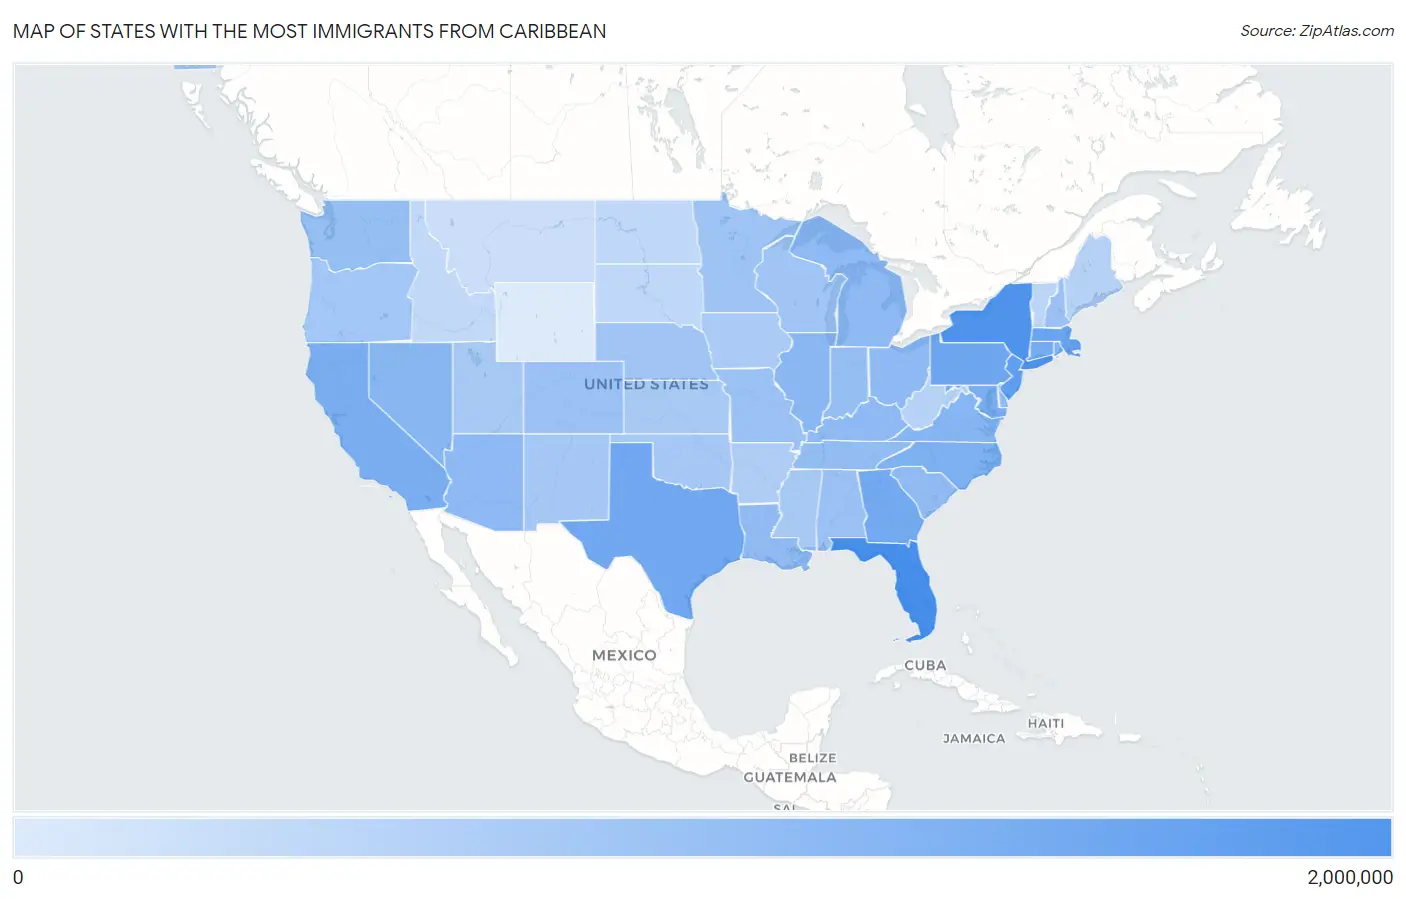 States with the Most Immigrants from Caribbean in the United States Map